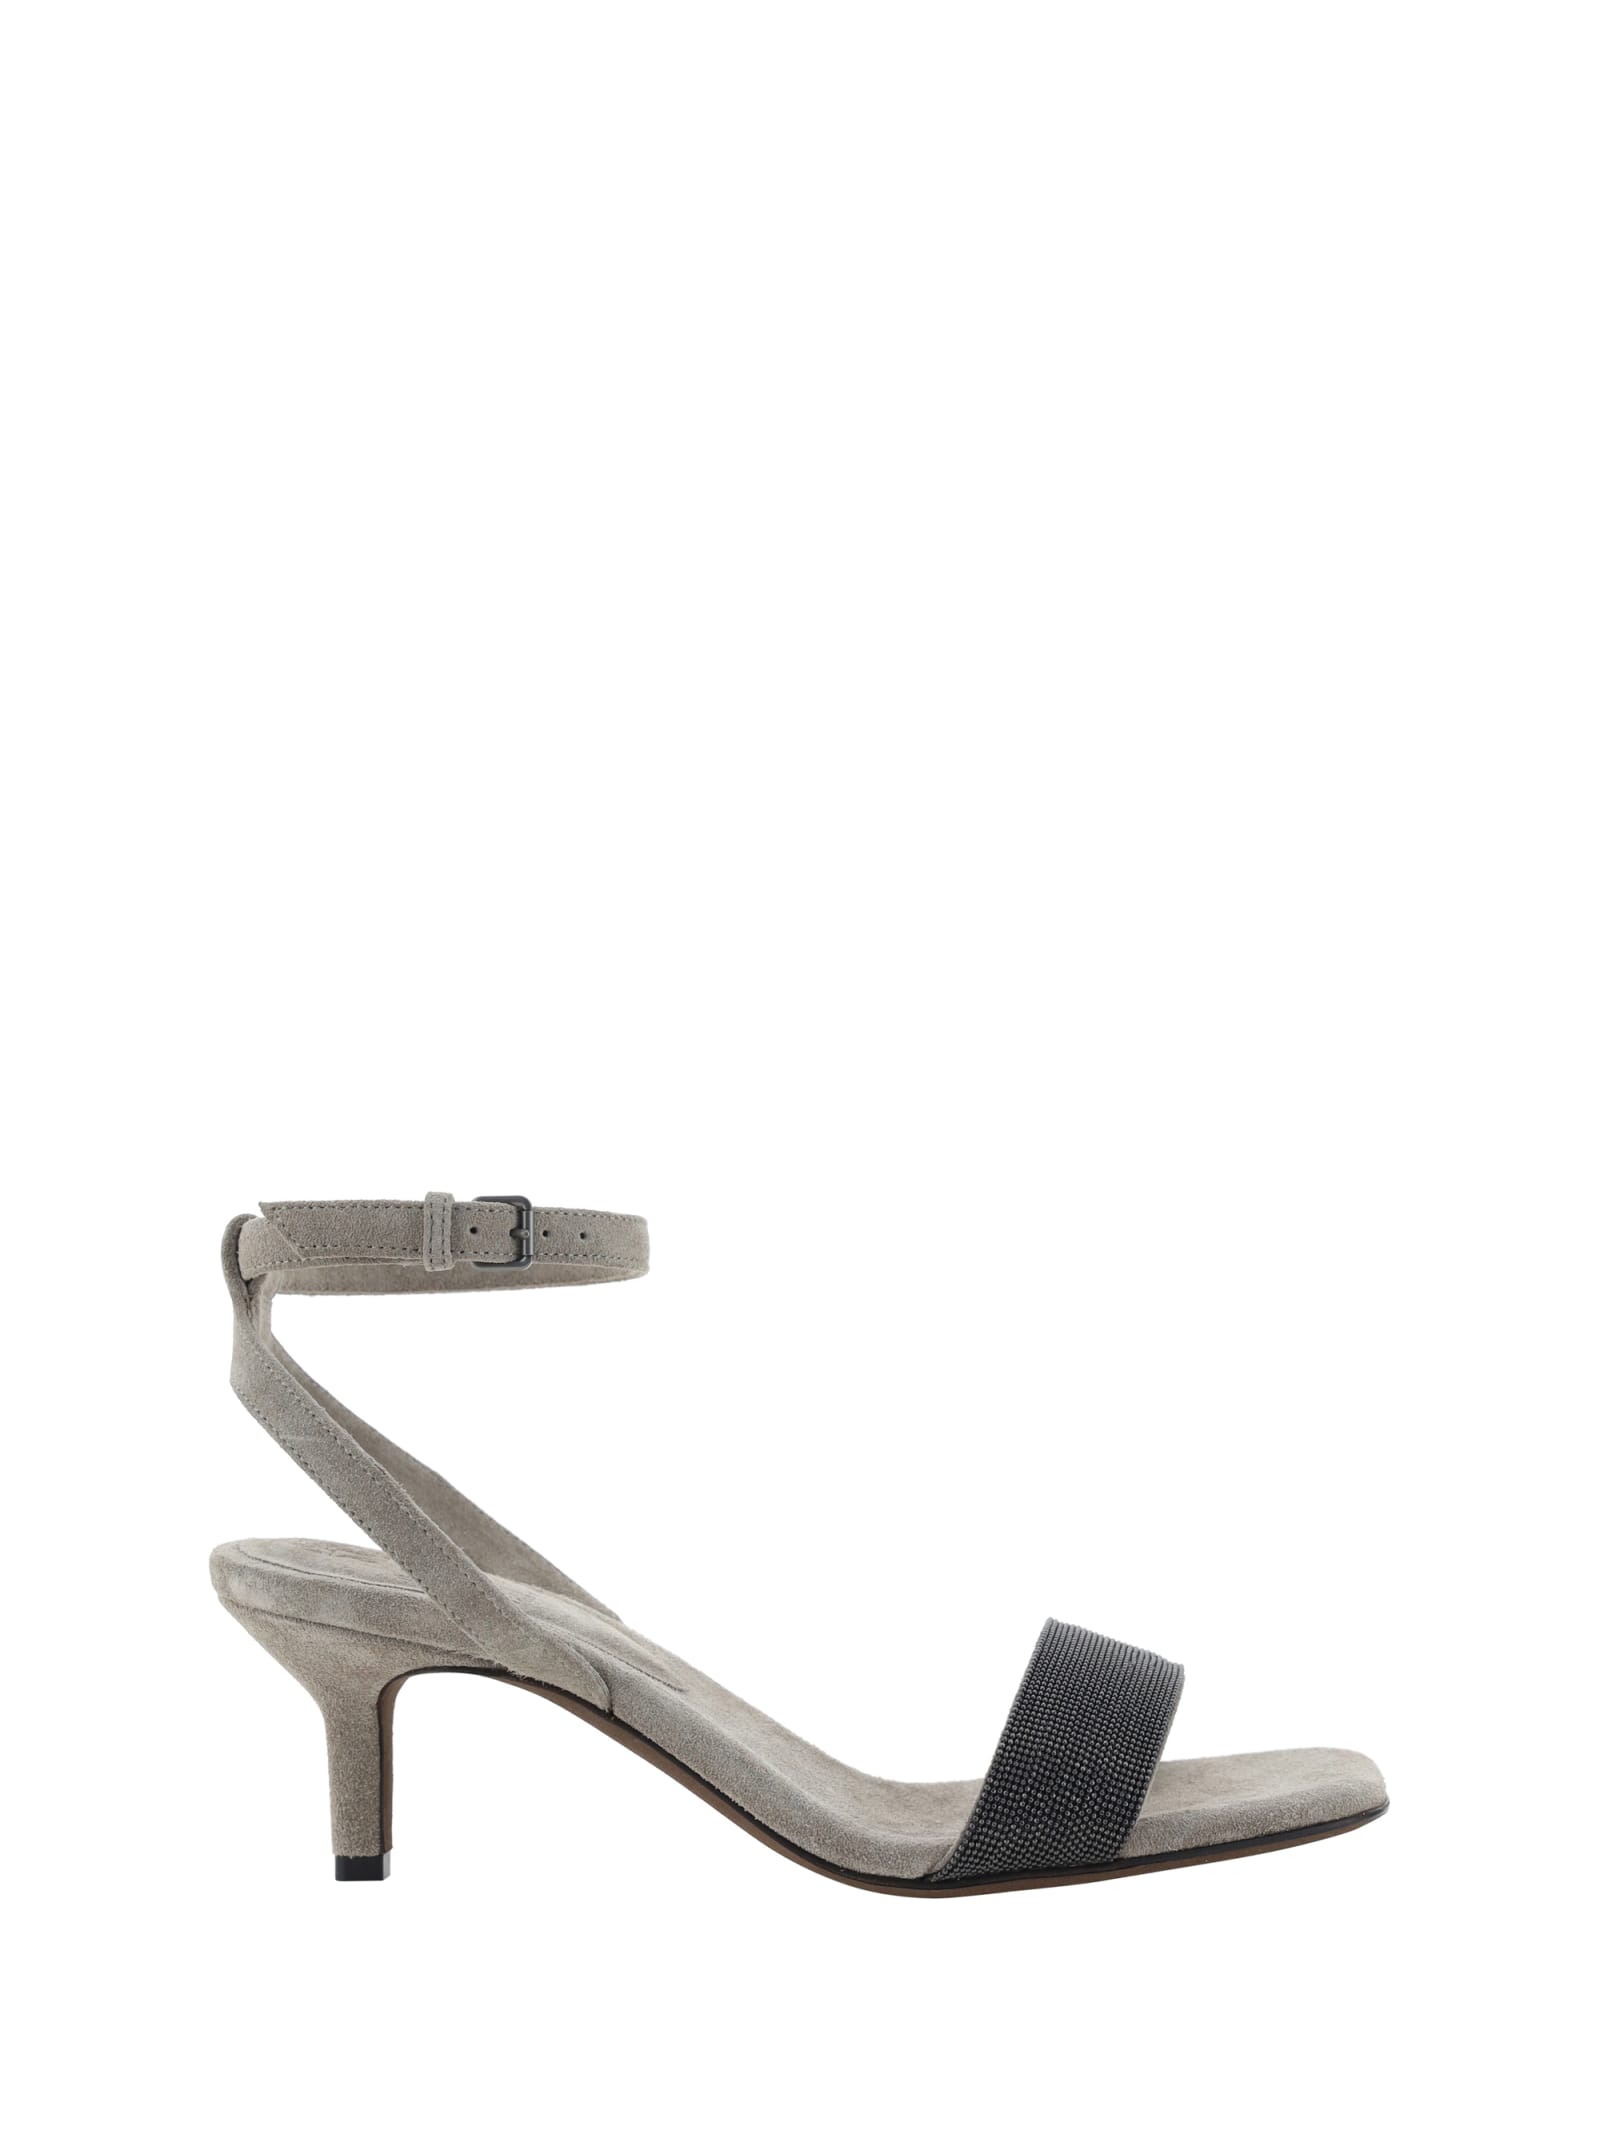 Brunello Cucinelli Pair Of Sandals With Heels In Gray